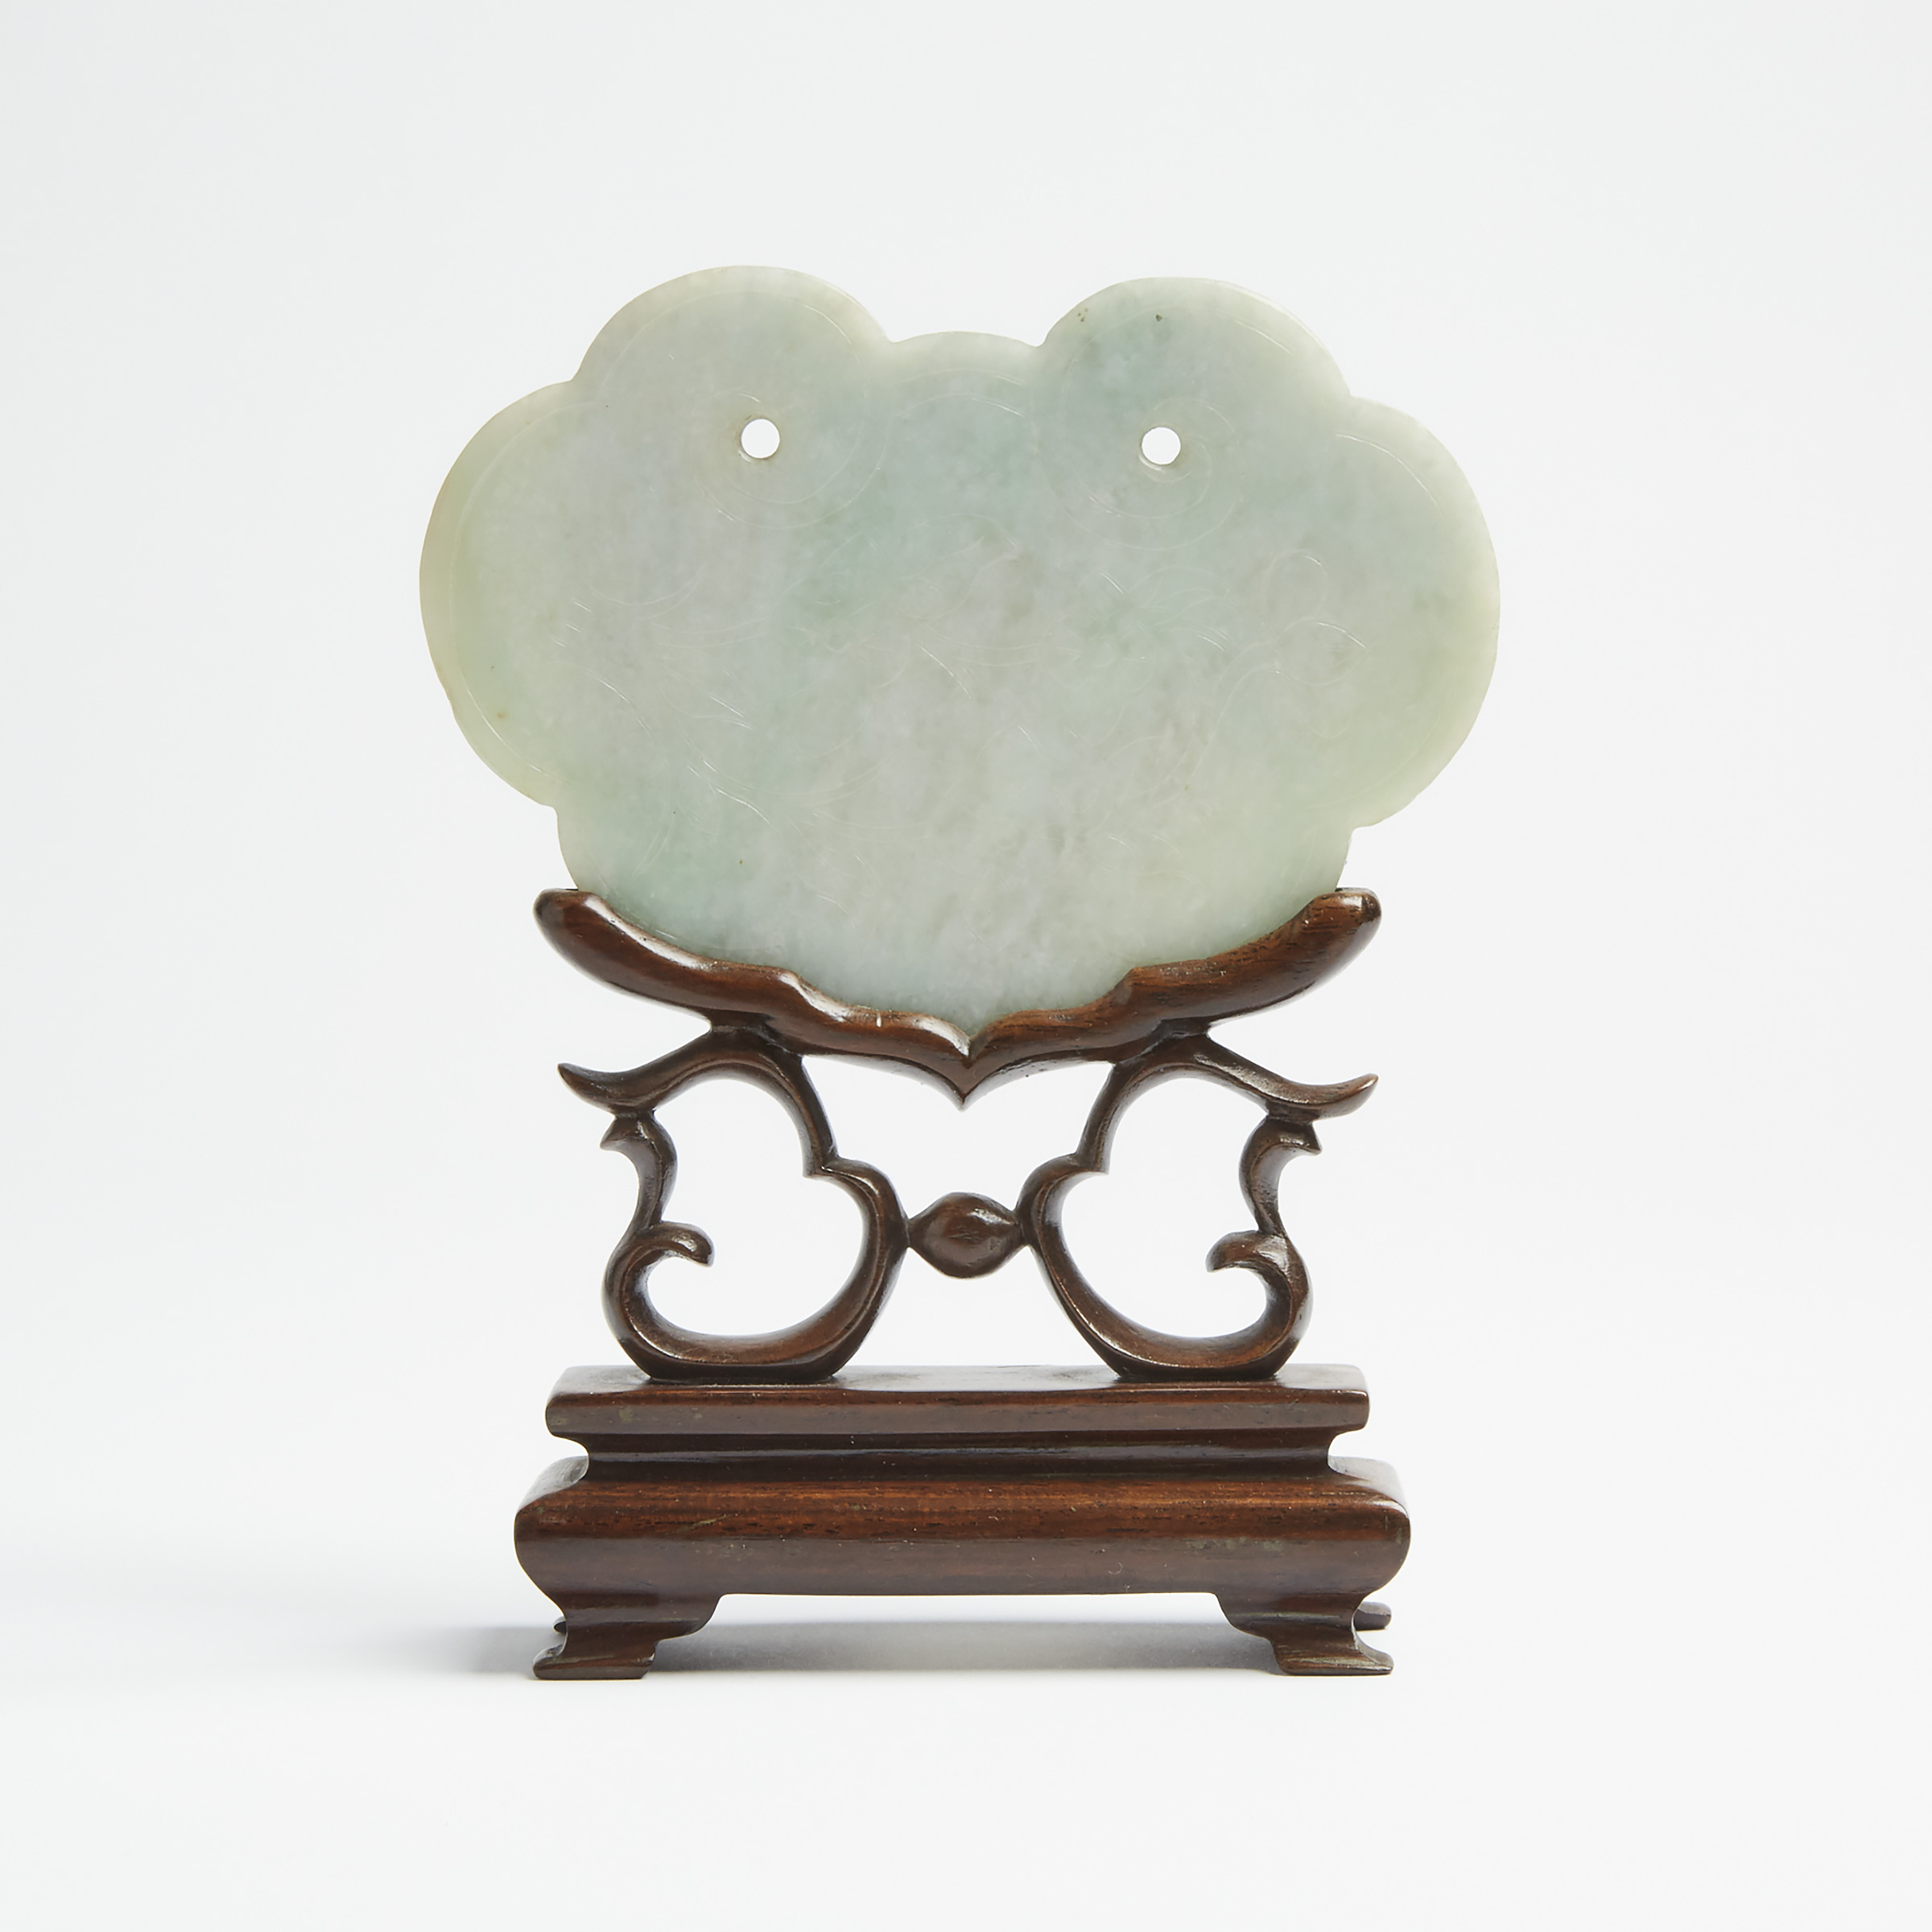 A Jadeite Ruyi Head-Shaped Plaque with Stand, Late Qing Dynasty